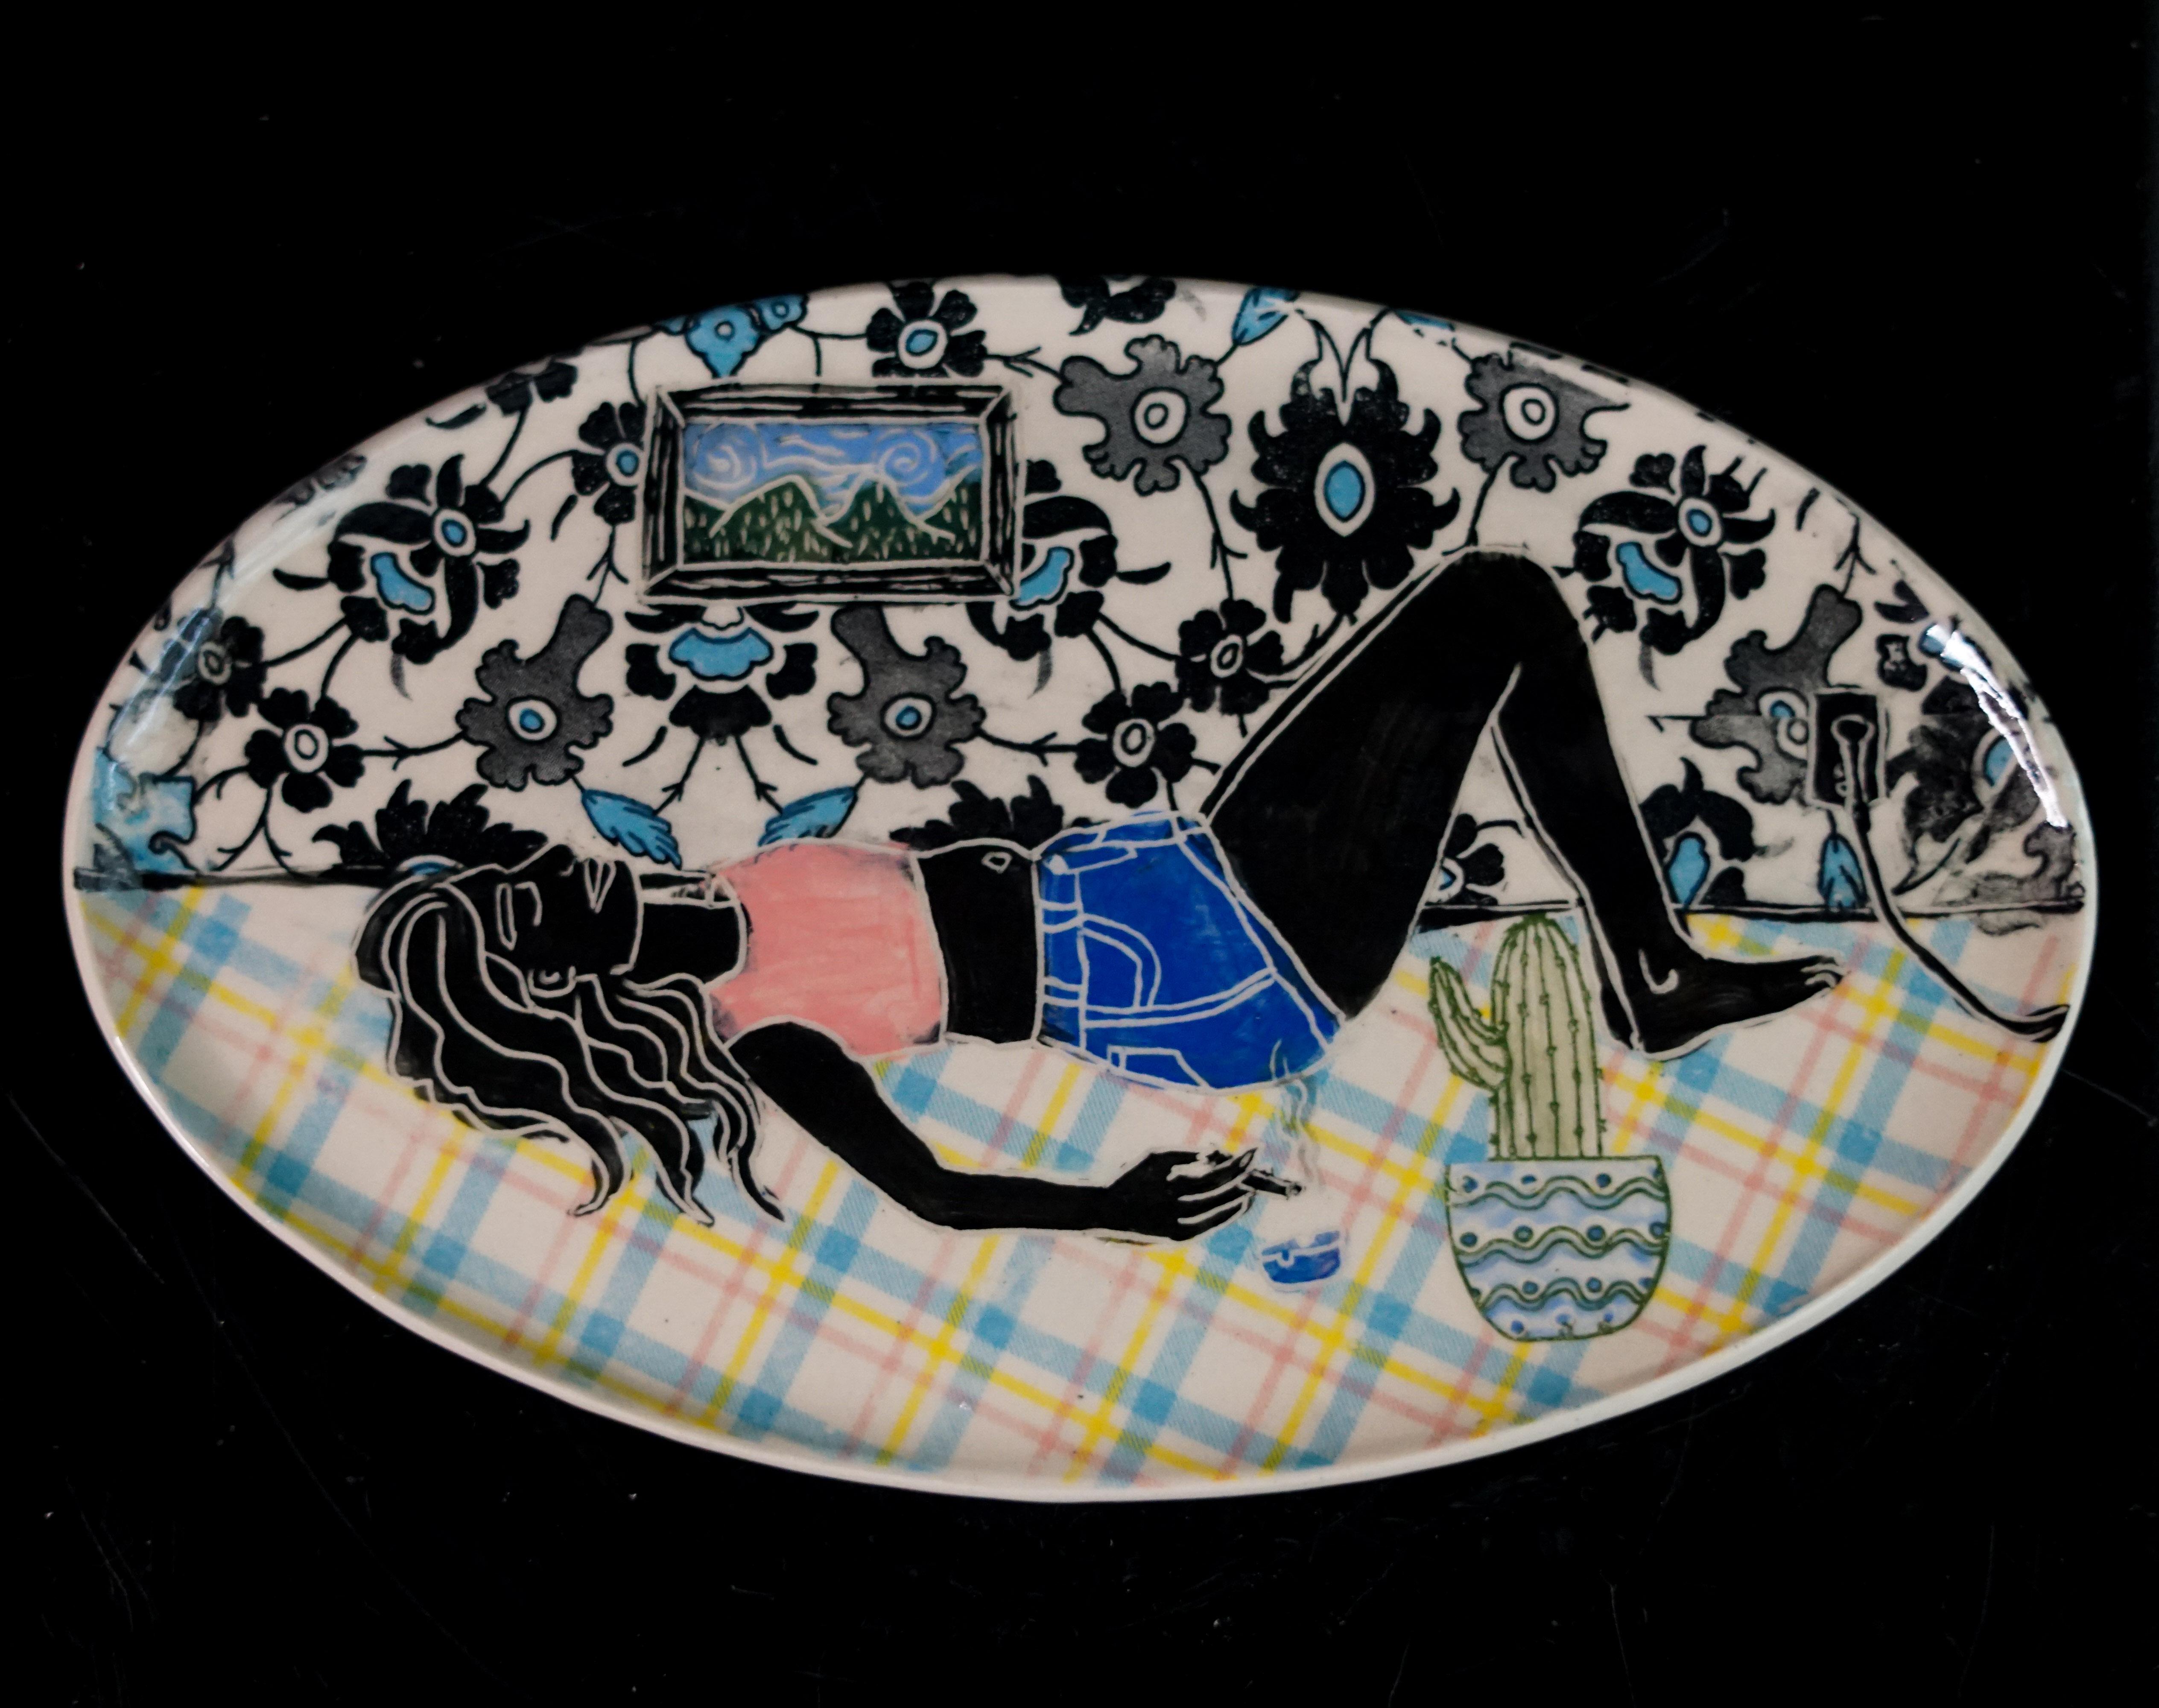 Eve in Repose, Hand built sculpture plate with sgraffito and collaged transfer